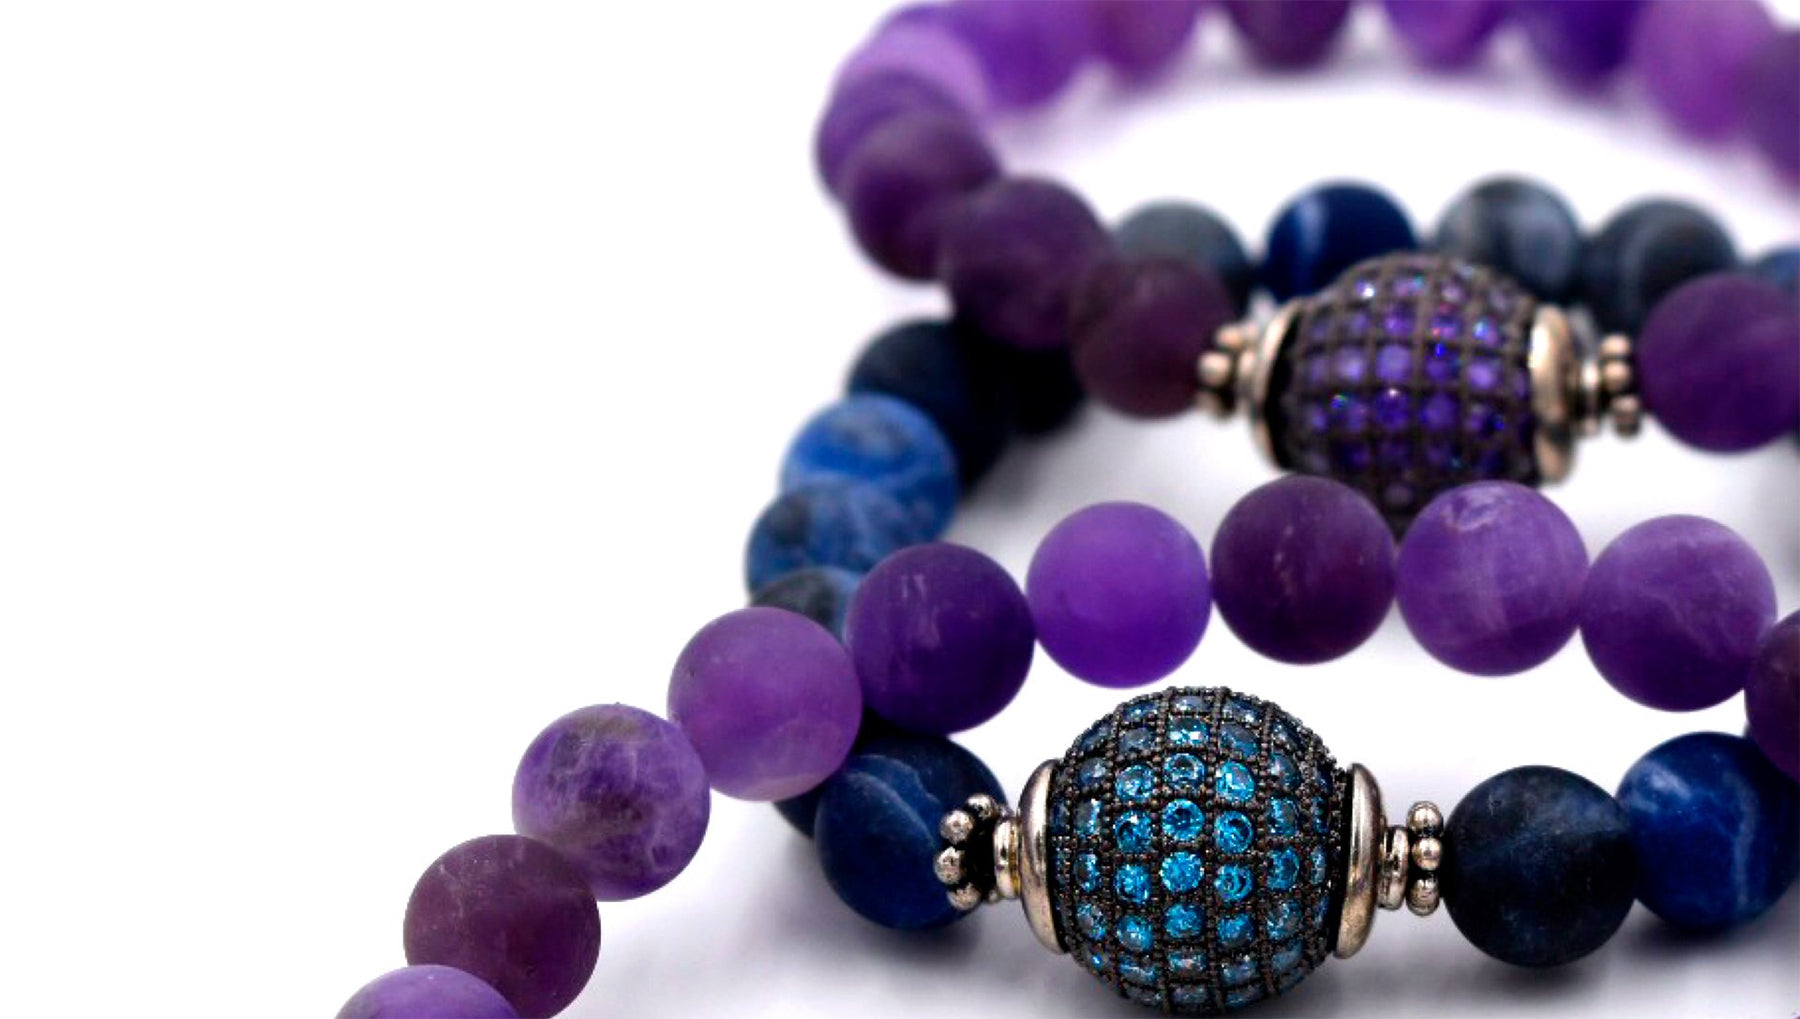 Two Vibrant 8MM Round Matte Purple Amethyst Beaded Bracelets with Dark Purple Pave Set Cubic Zirconia Center Bead with Sterling Silver Accents, Single 8MM Round Matte Navy Blue Agate Bracelet with 12MM Aqua Blue Pave Set Center Bead in Oxidized Metal